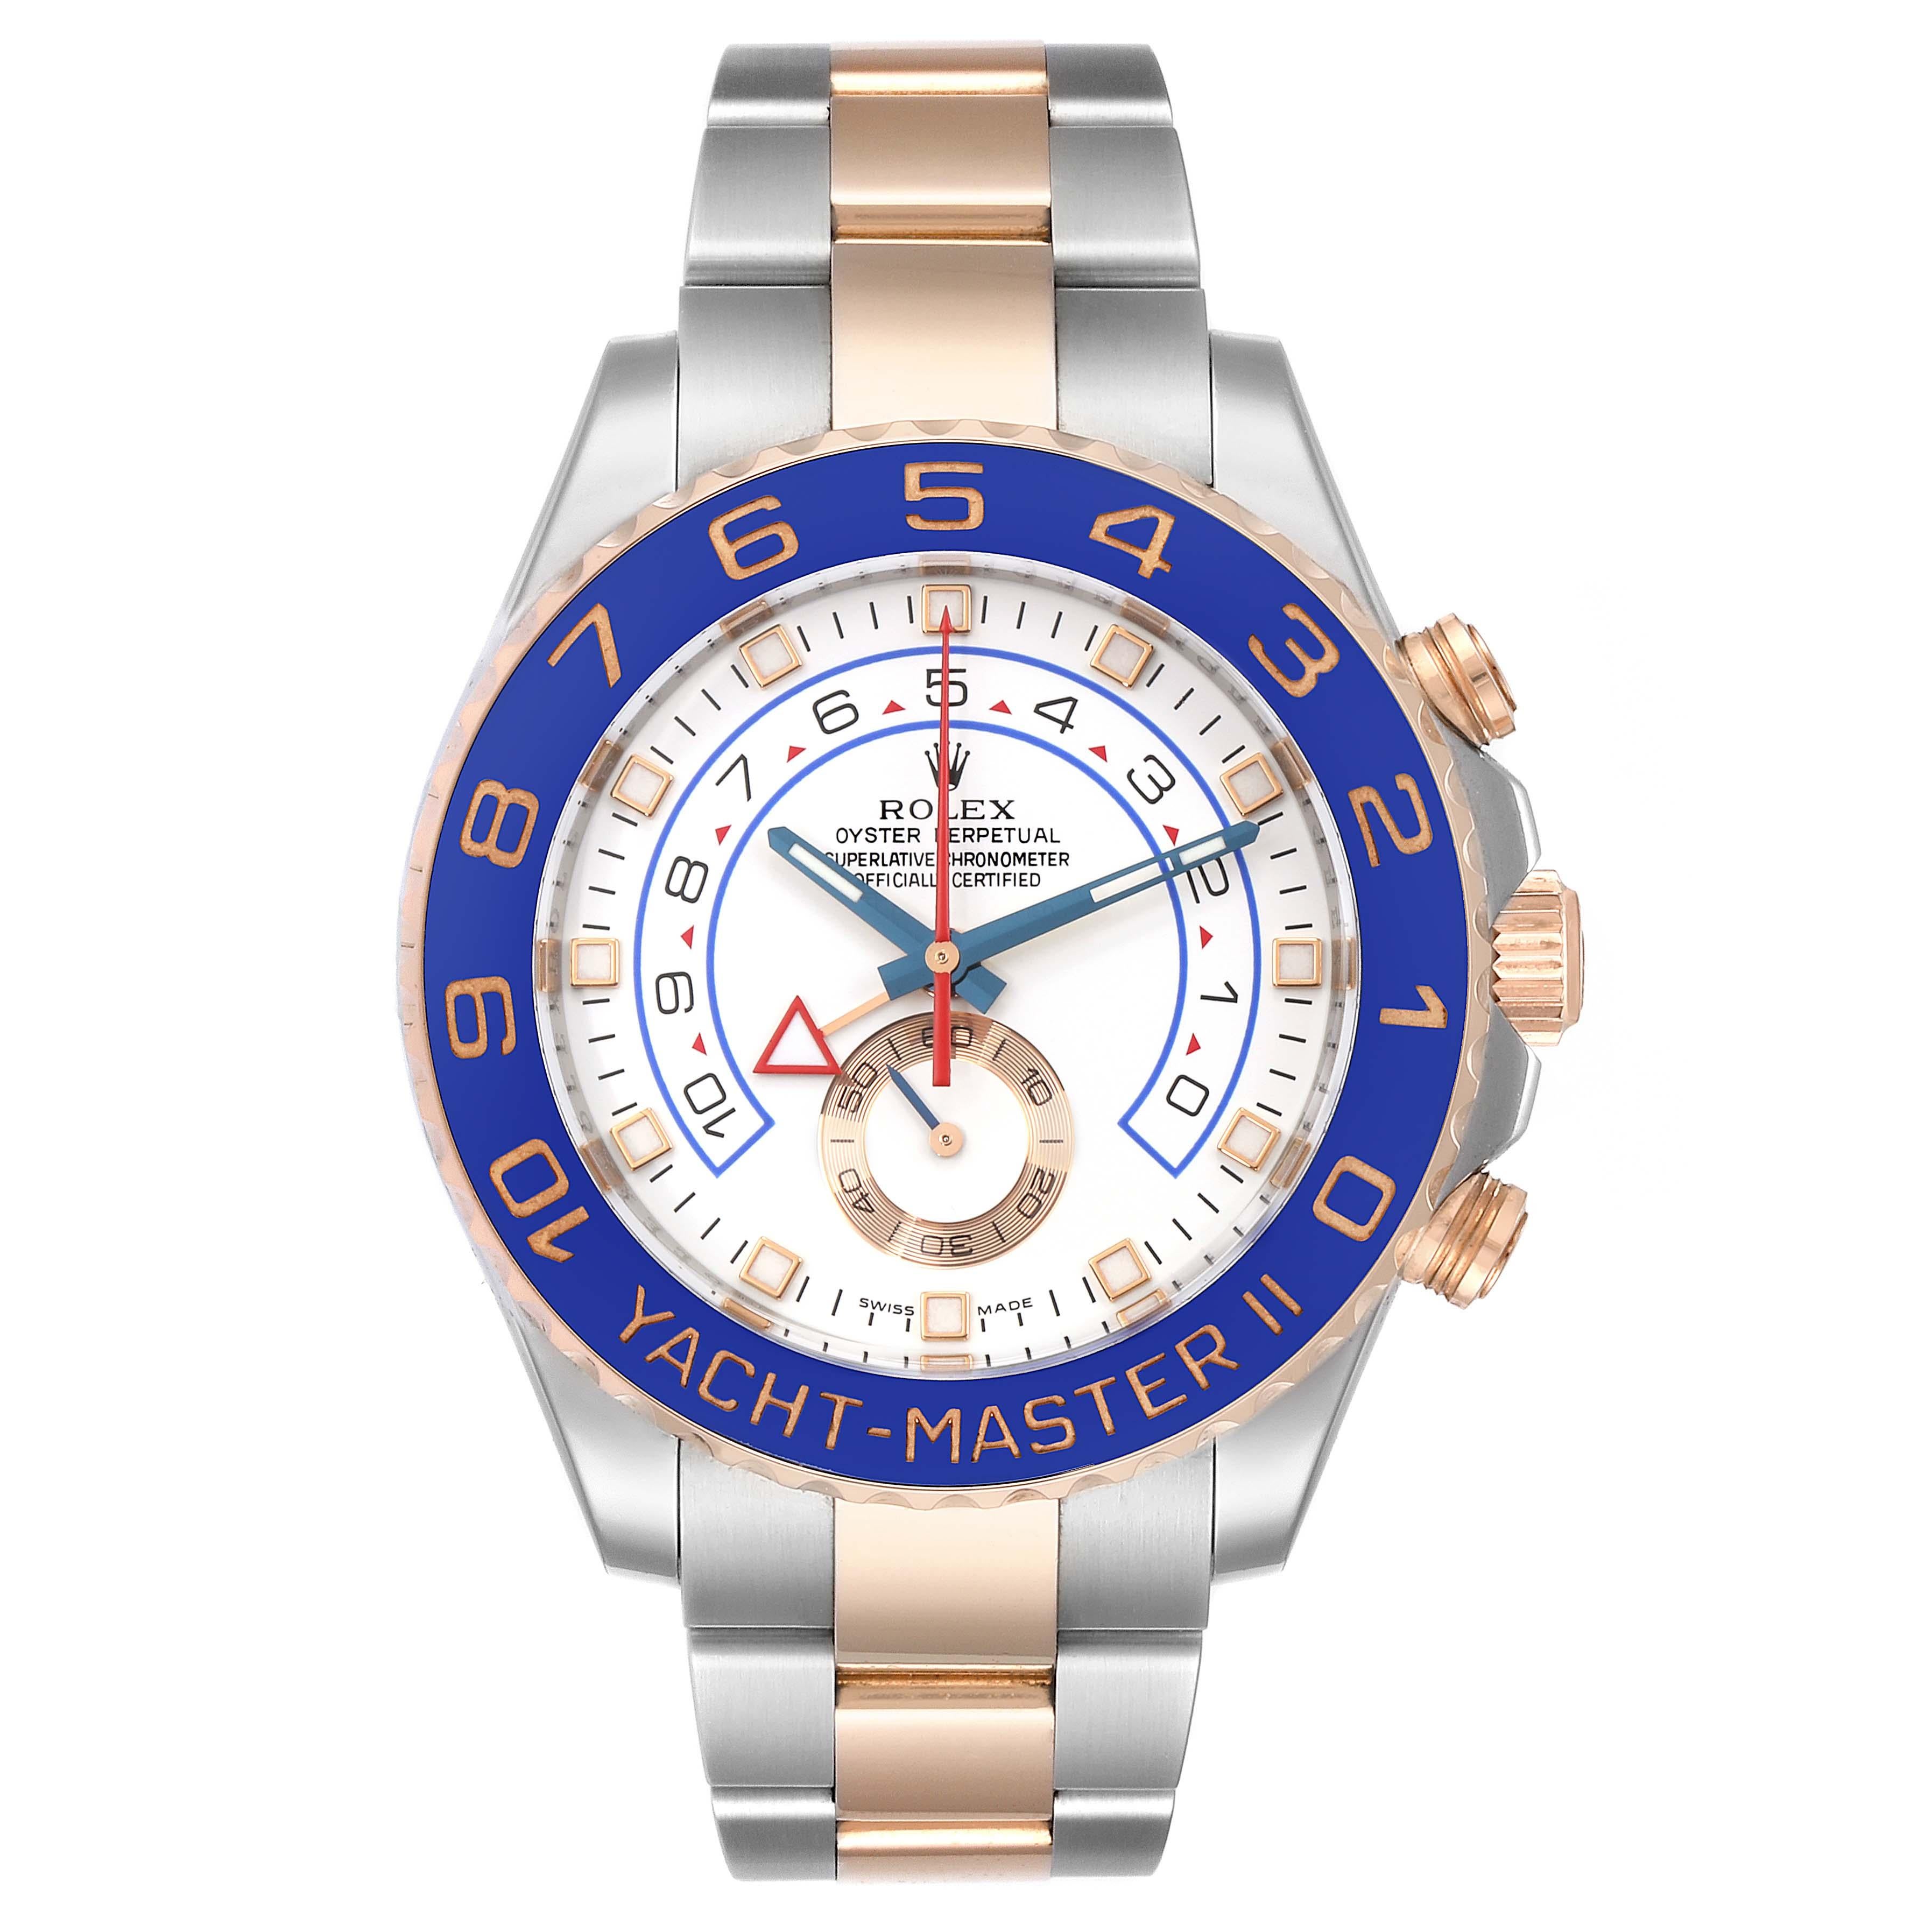 Rolex Yachtmaster II Rolesor EveRose Gold Steel Mens Watch 116681. Officially certified chronometer self-winding movement. Stainless steel and 18K rose gold case 44.0 mm in diameter. Screw down crown and caseback. Rolex logo on a crown. 90 degree